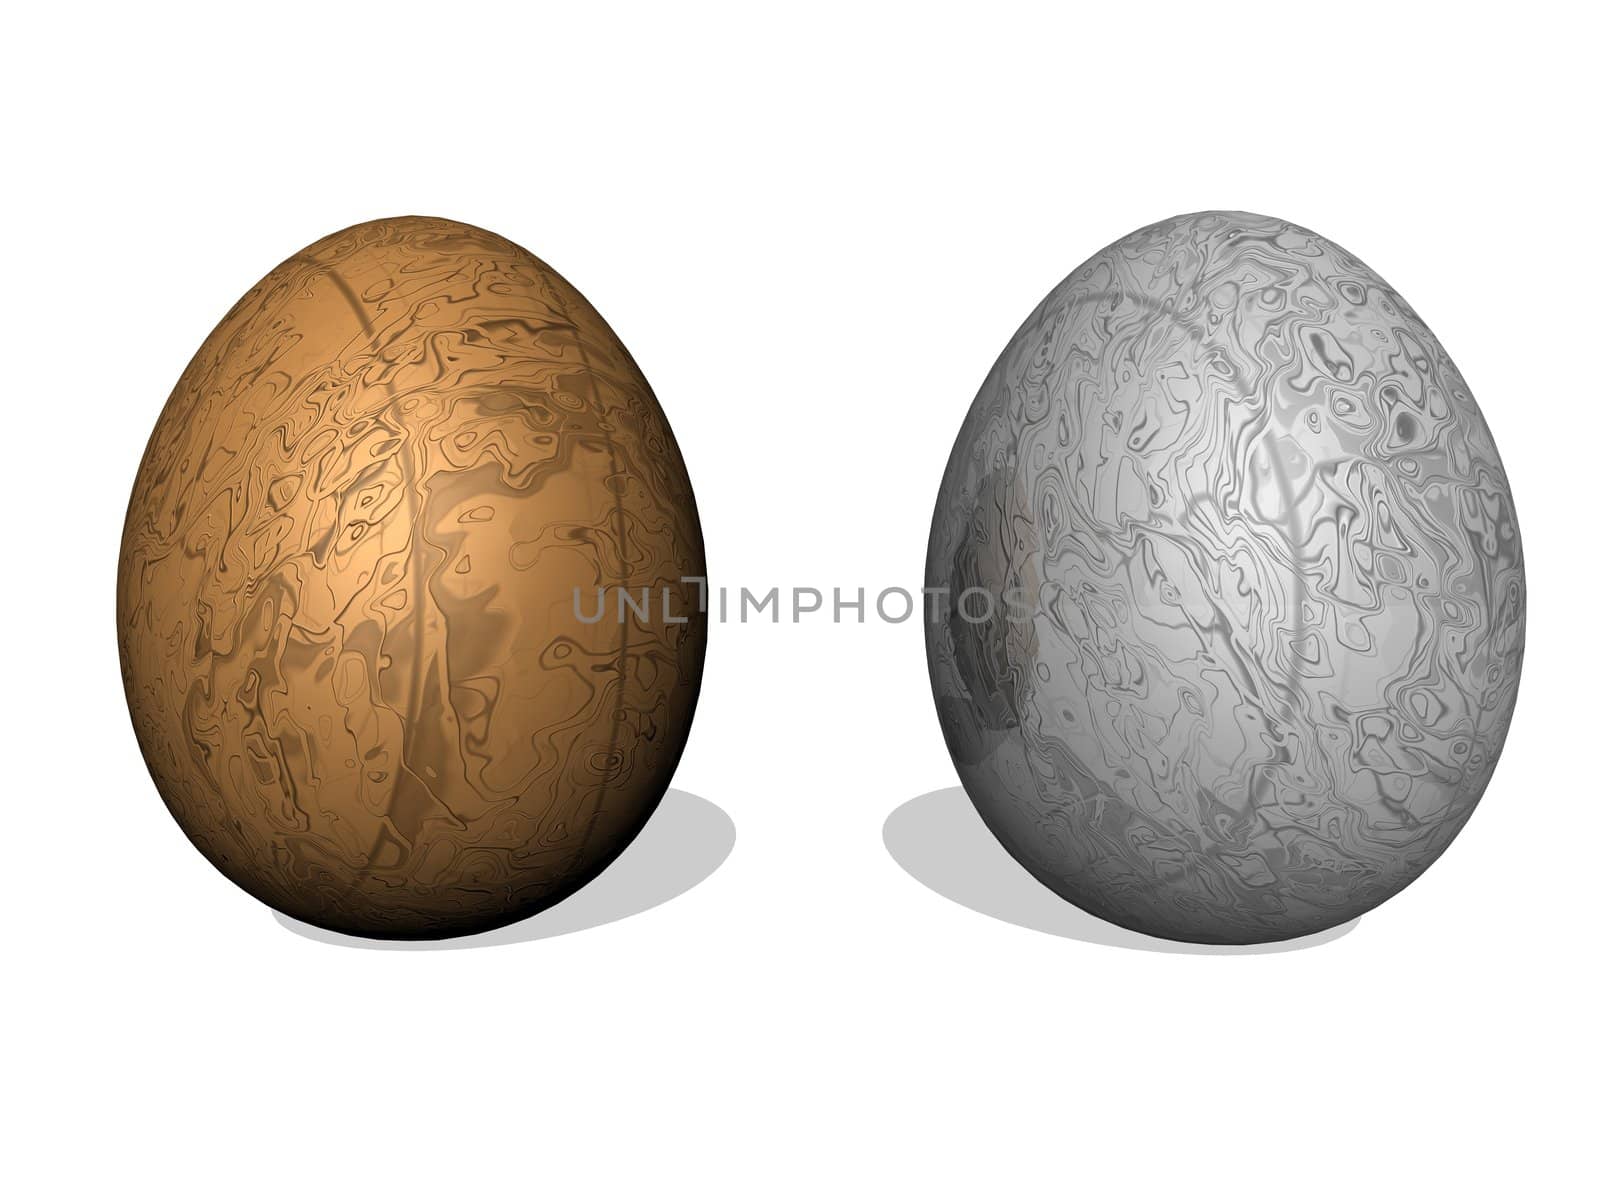 Golden and silver easter eggs by Elenaphotos21